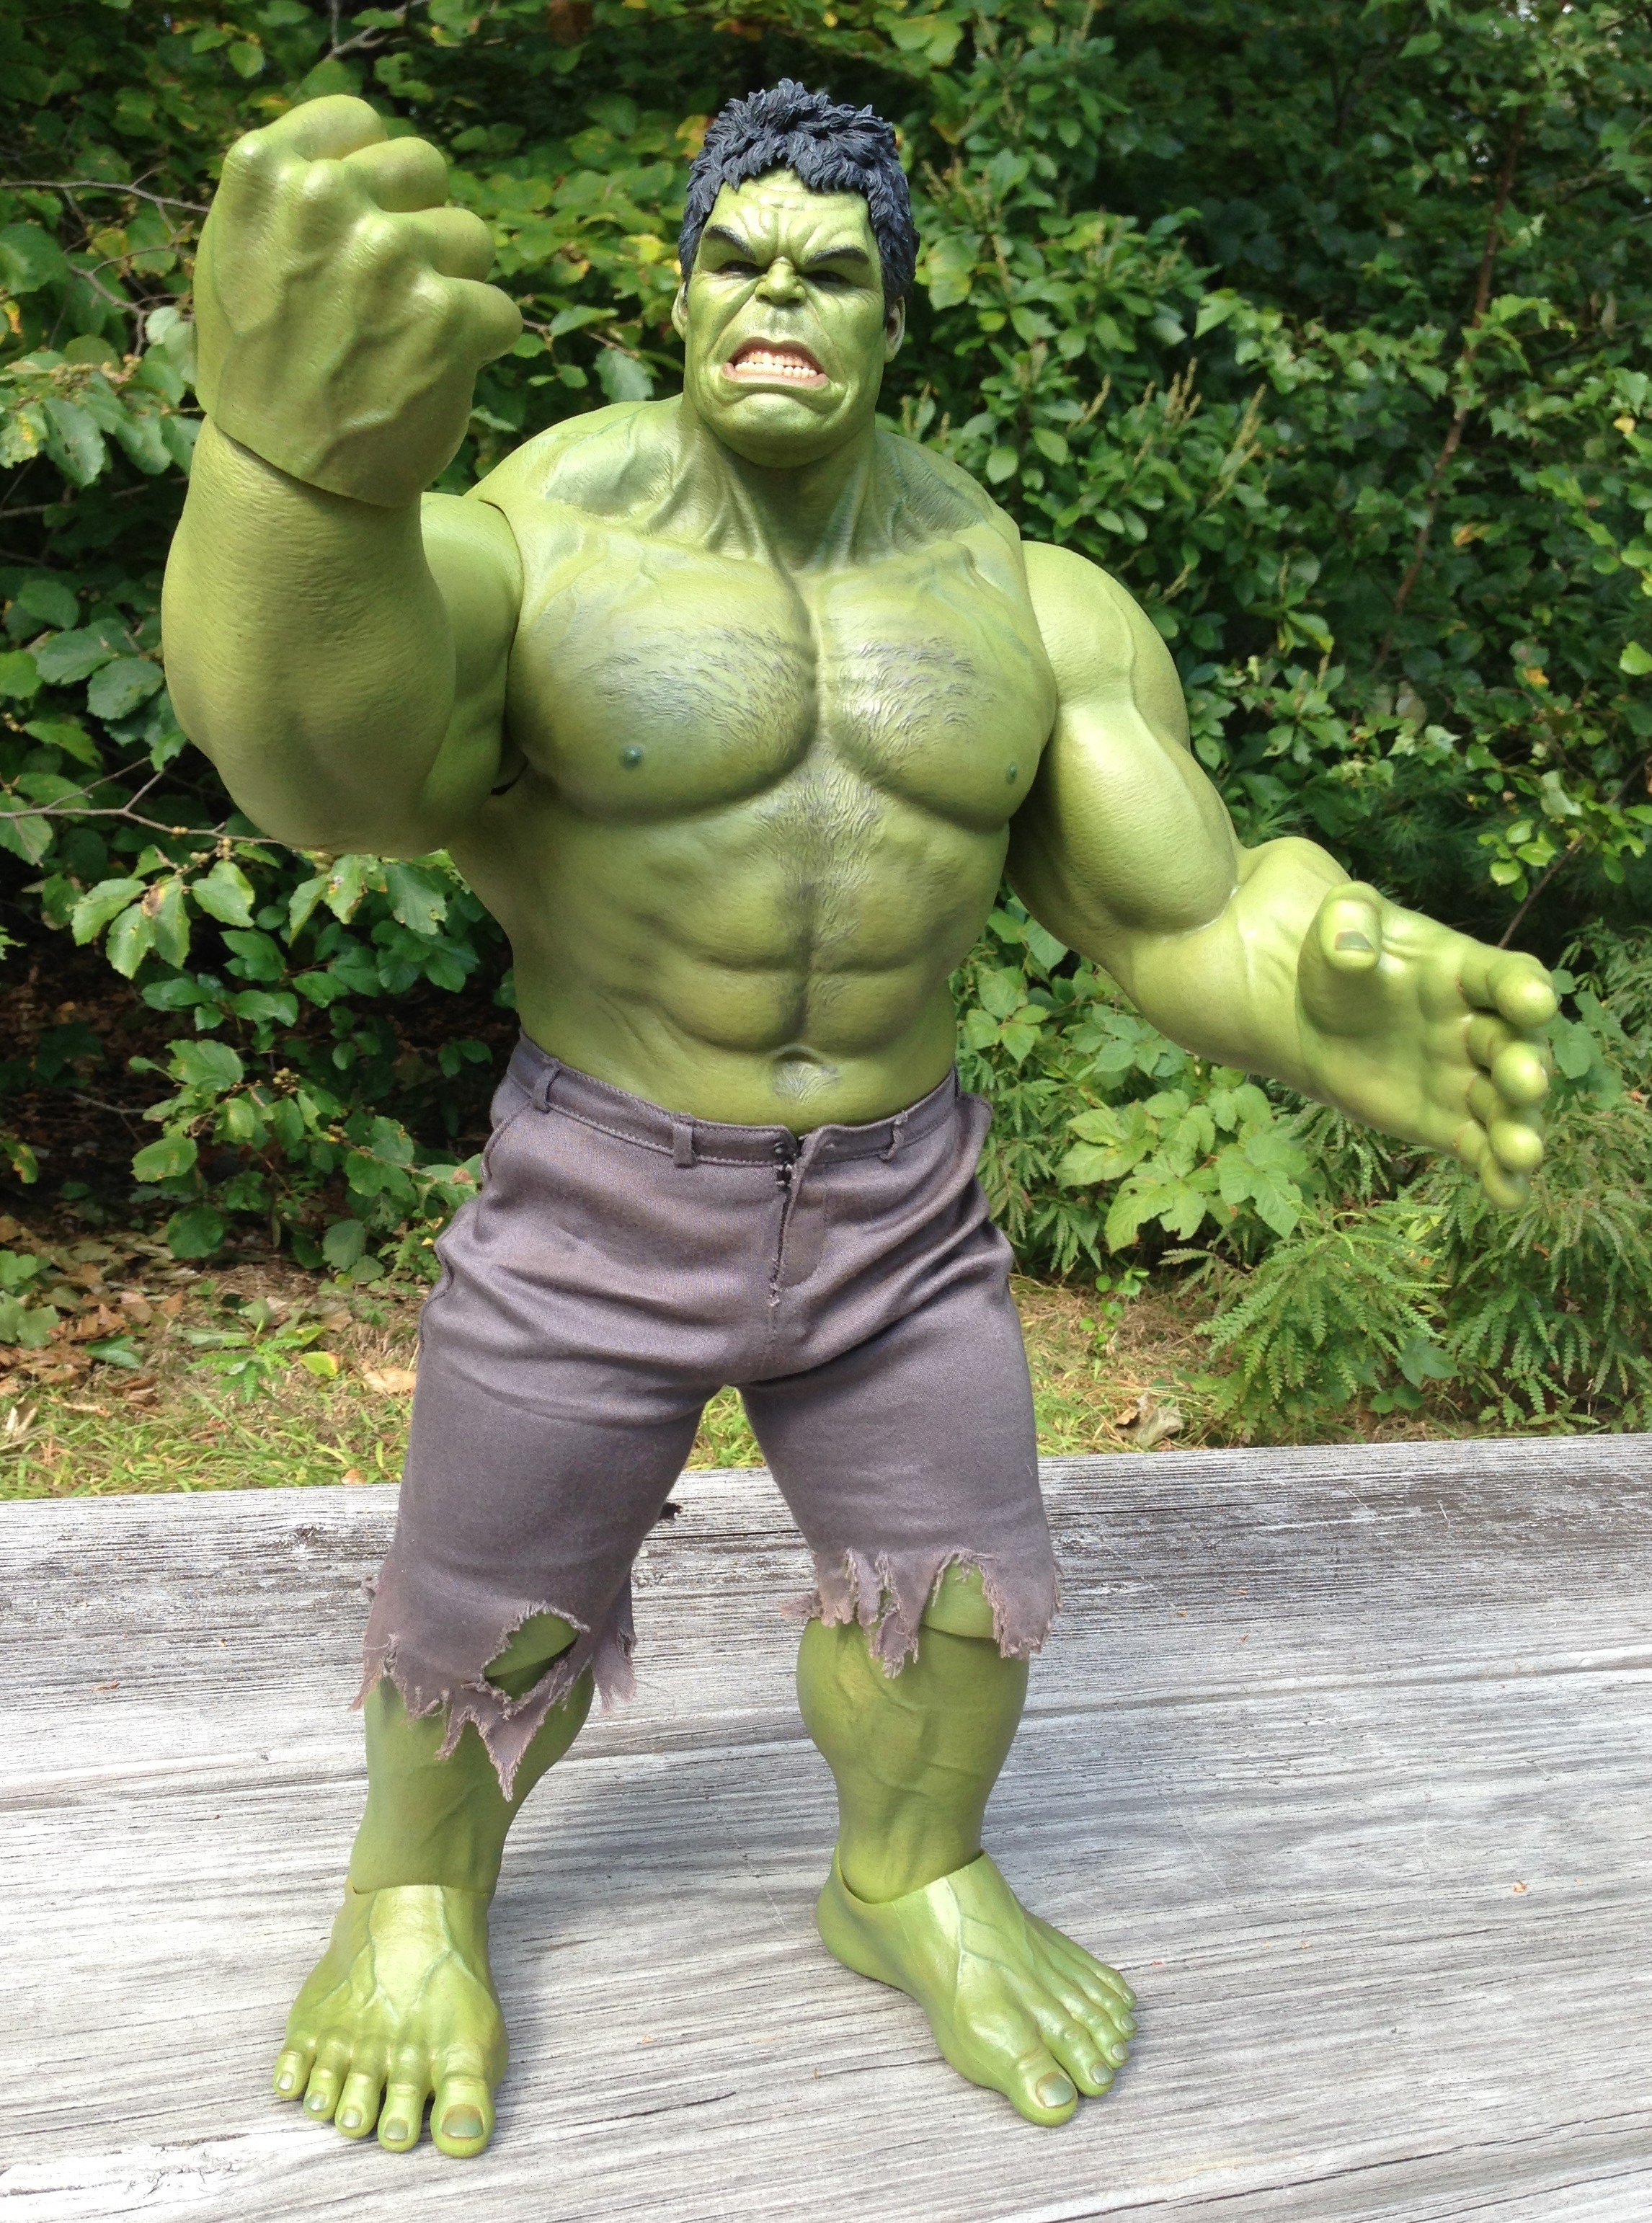 Hot Toys Hulk Review Avengers 1:6 Scale Figure MMS 186 - Marvel Toy News